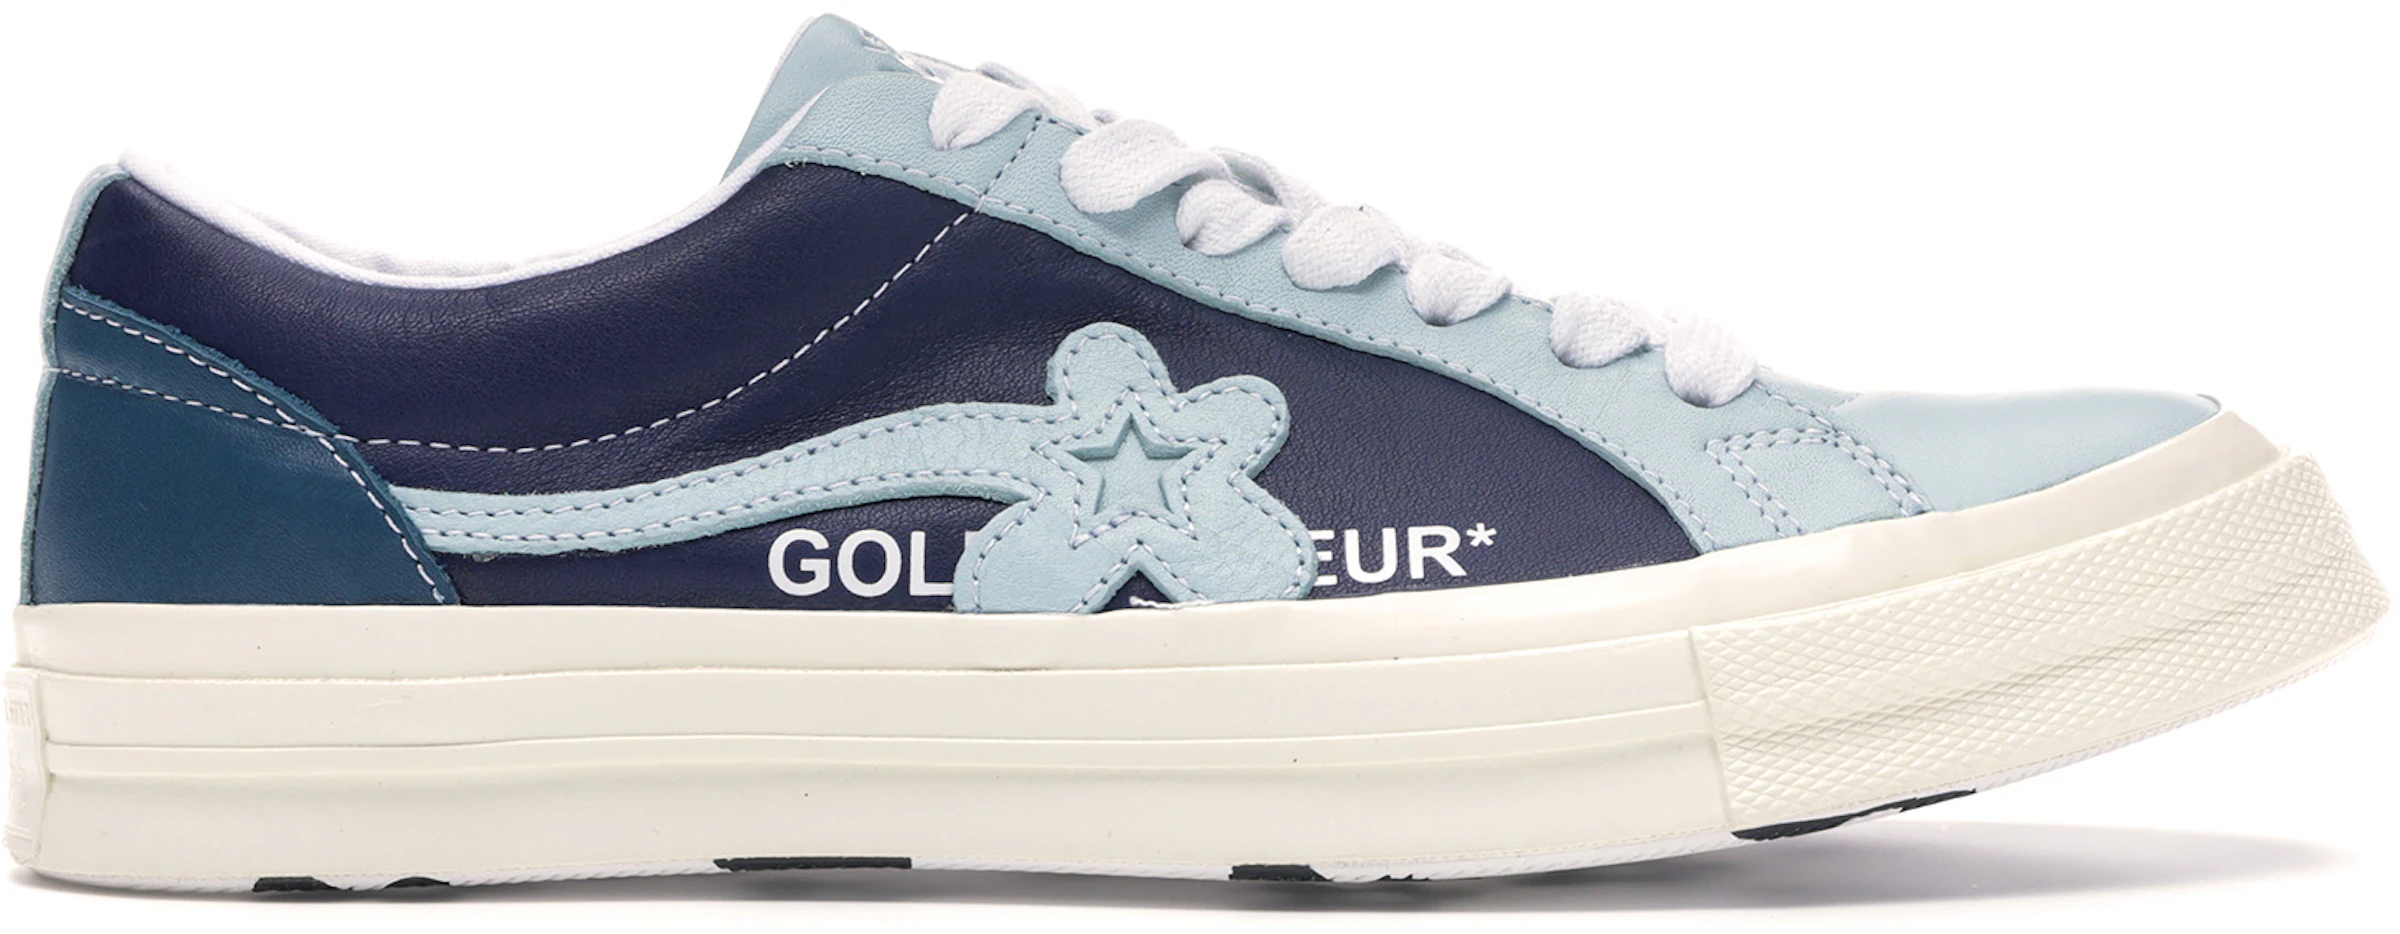 Converse One Star Ox Golf Le Fleur Industrial Pack Barely - 164024C - ES